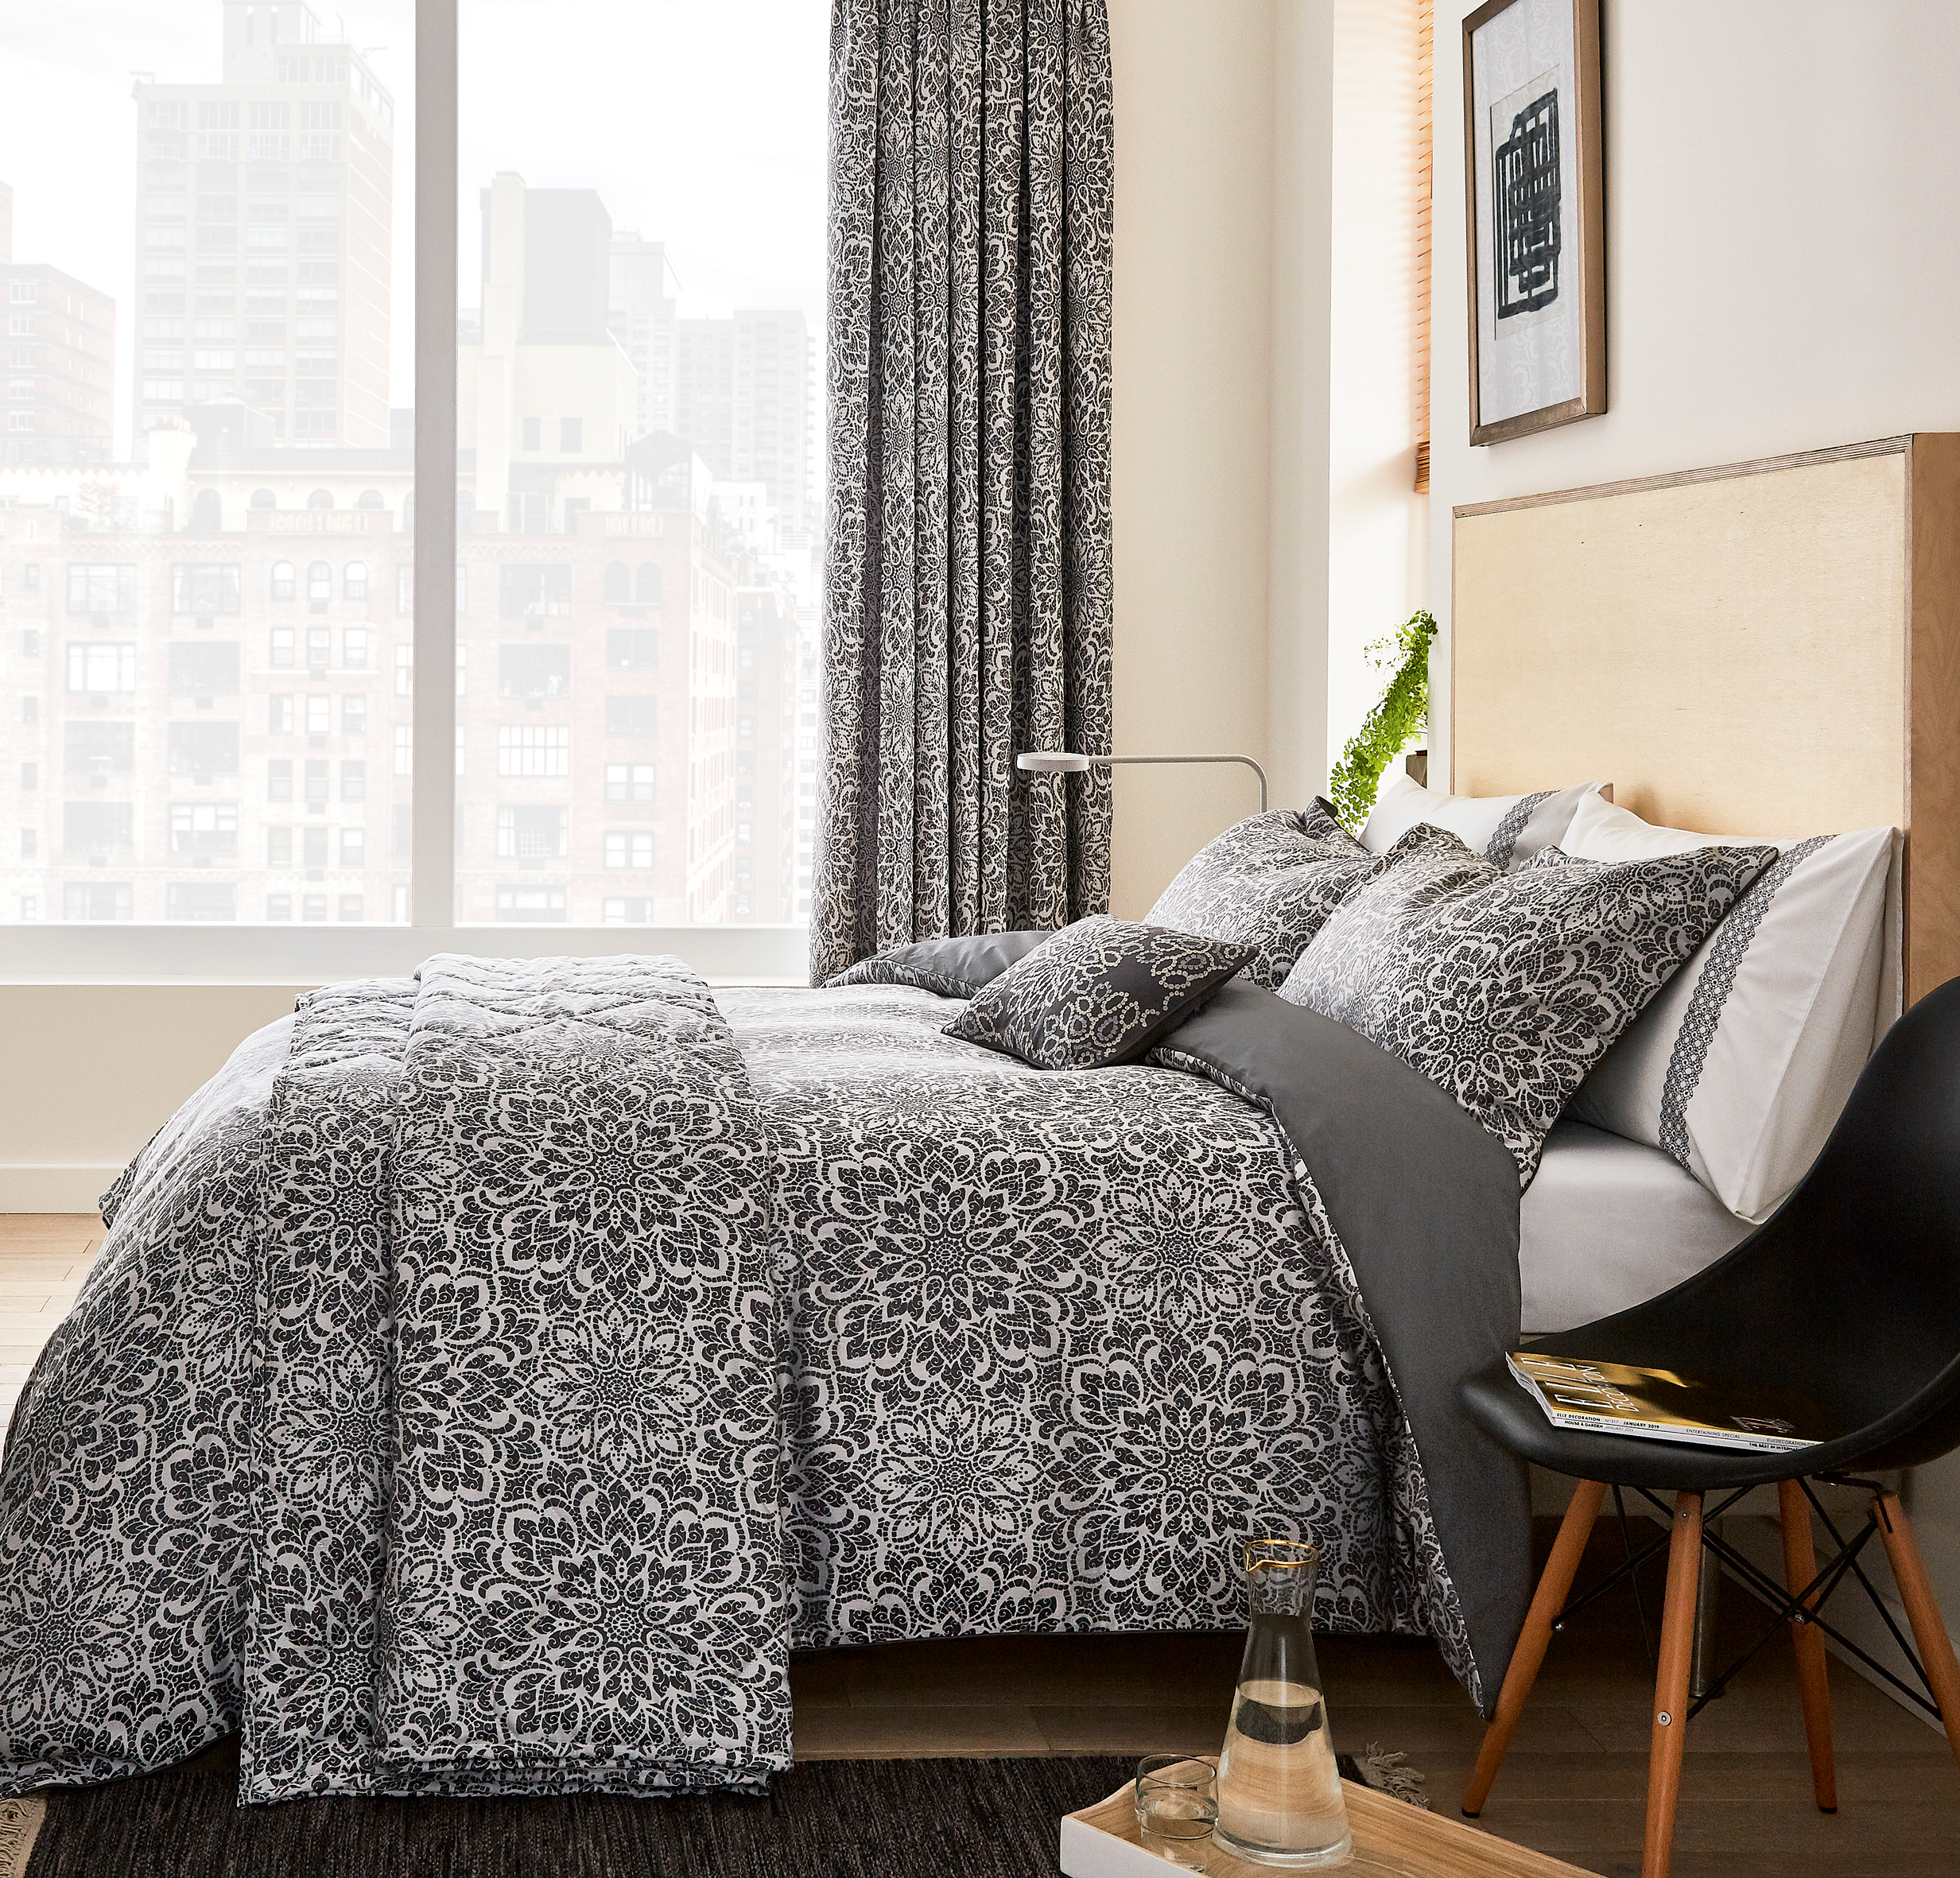 A further 20% off Zahra bedding